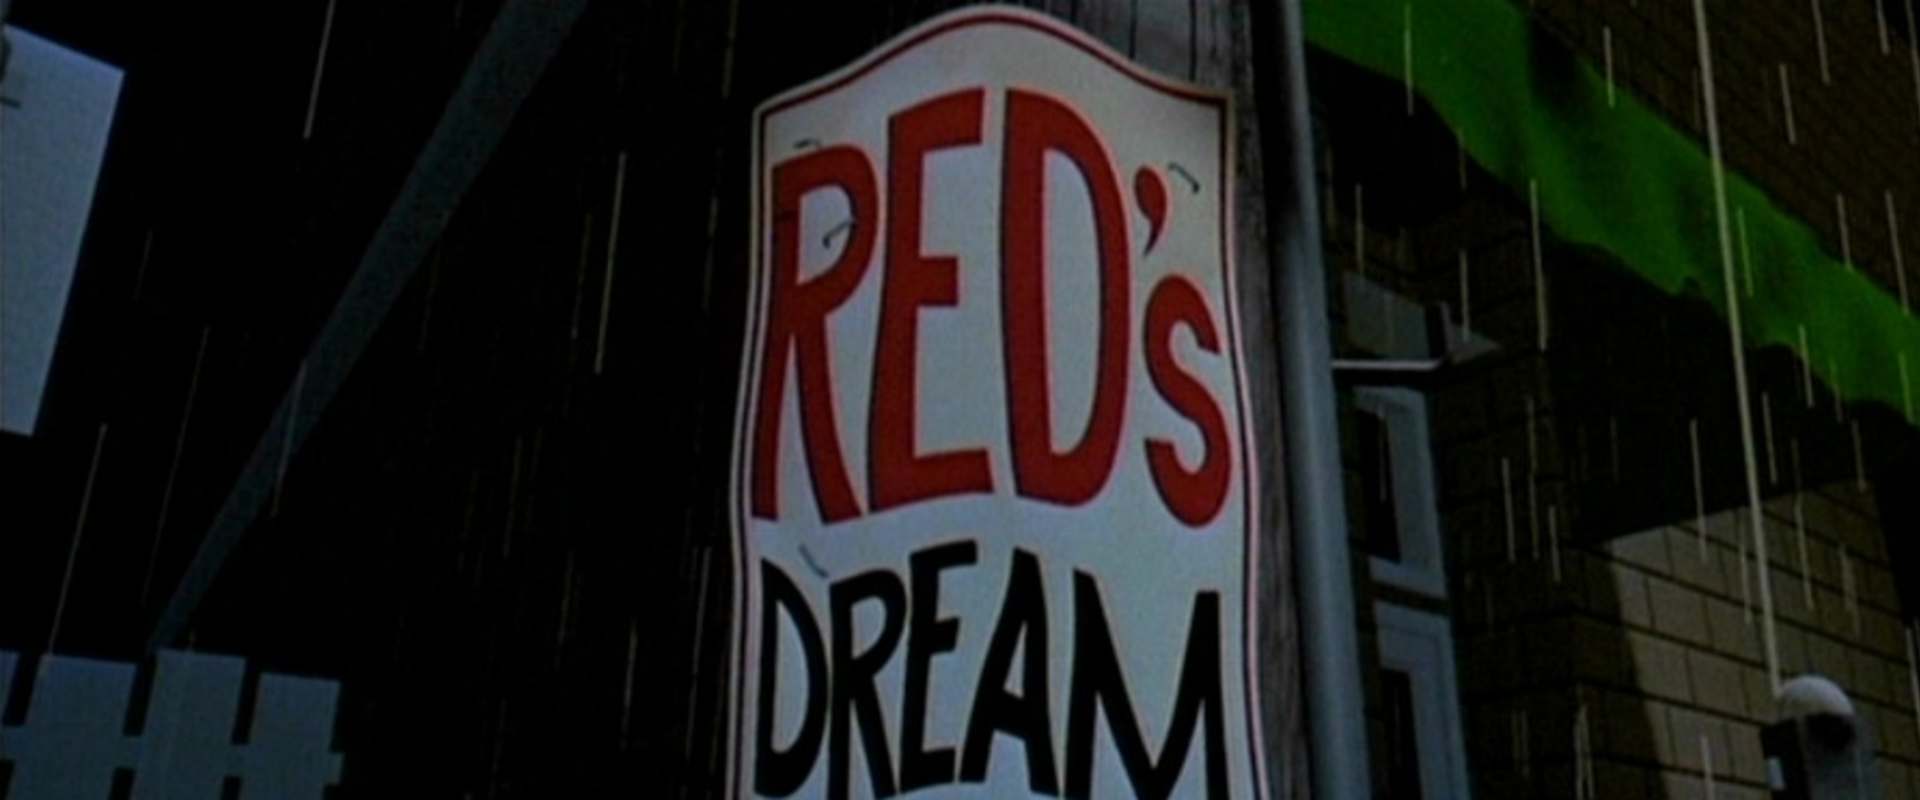 Red's Dream background 1